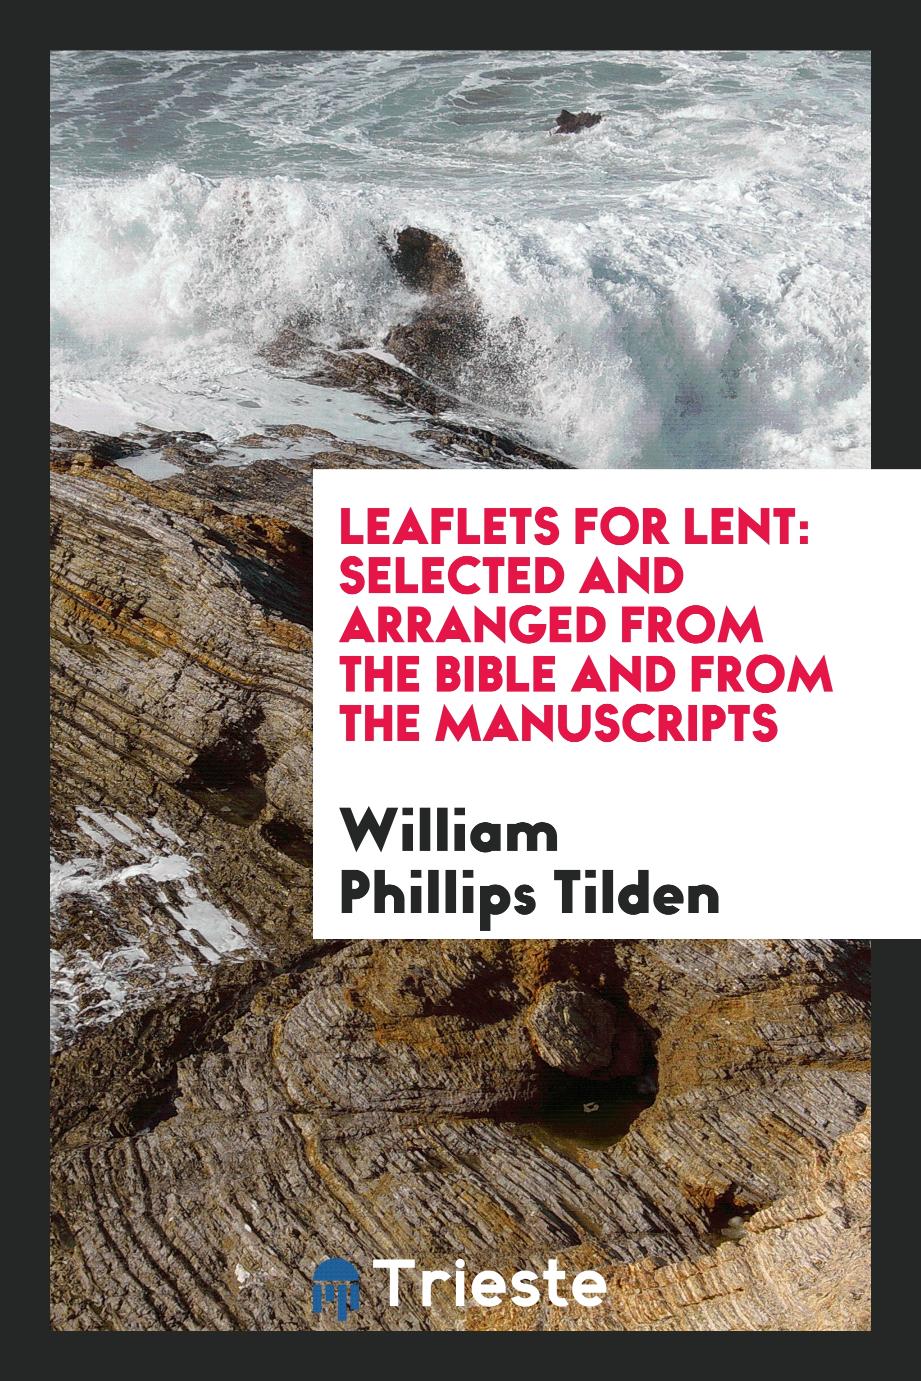 Leaflets for Lent: Selected and Arranged from the Bible and from the Manuscripts